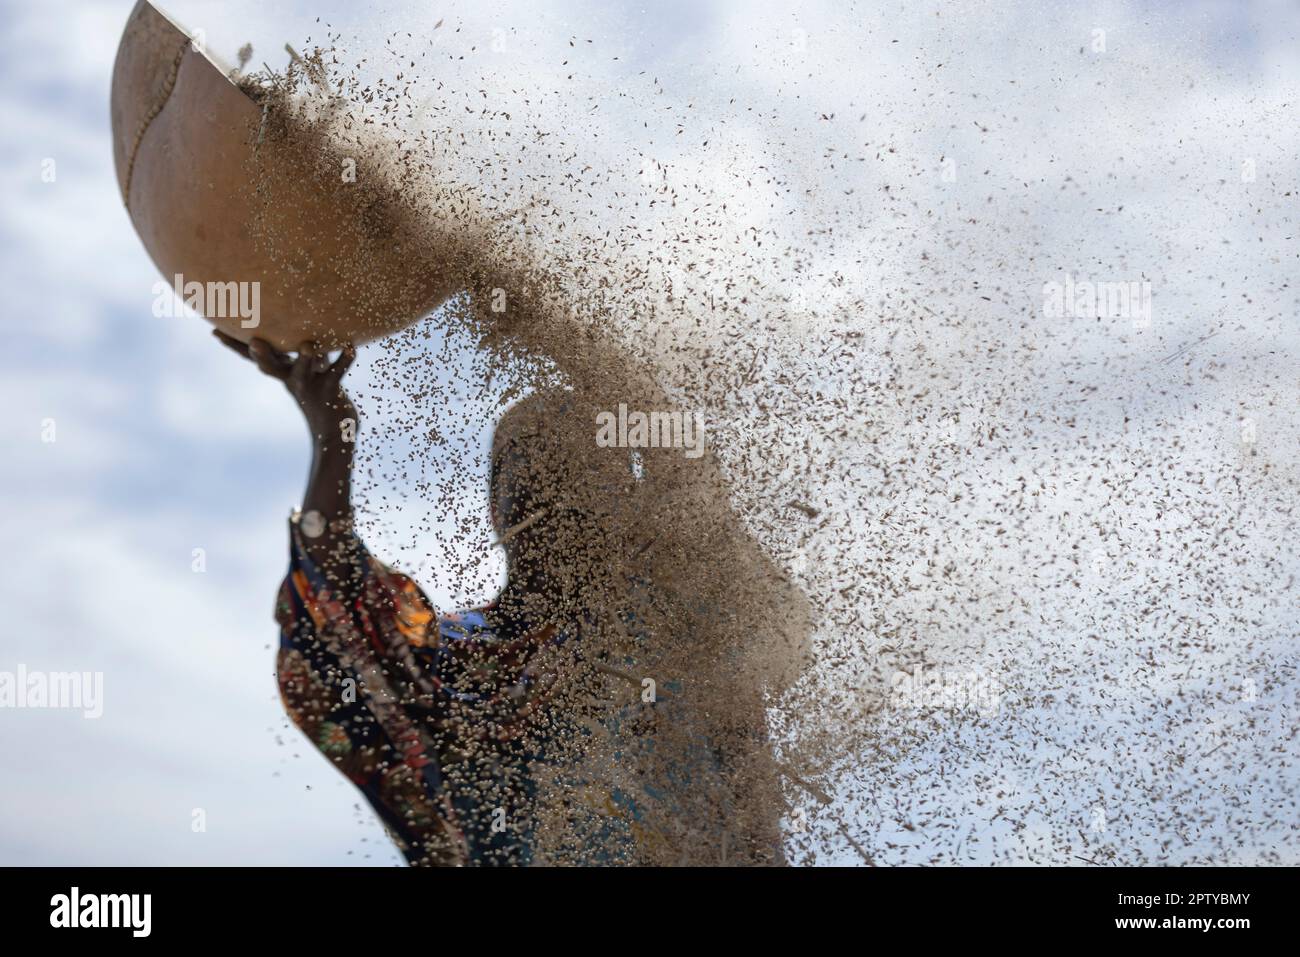 A muslim woman in traditional colorful dress winnows her millet grain crop on her farm in Segou Region, Mali, West Africa. 2022 Mali drought and hunger crisis. Stock Photo